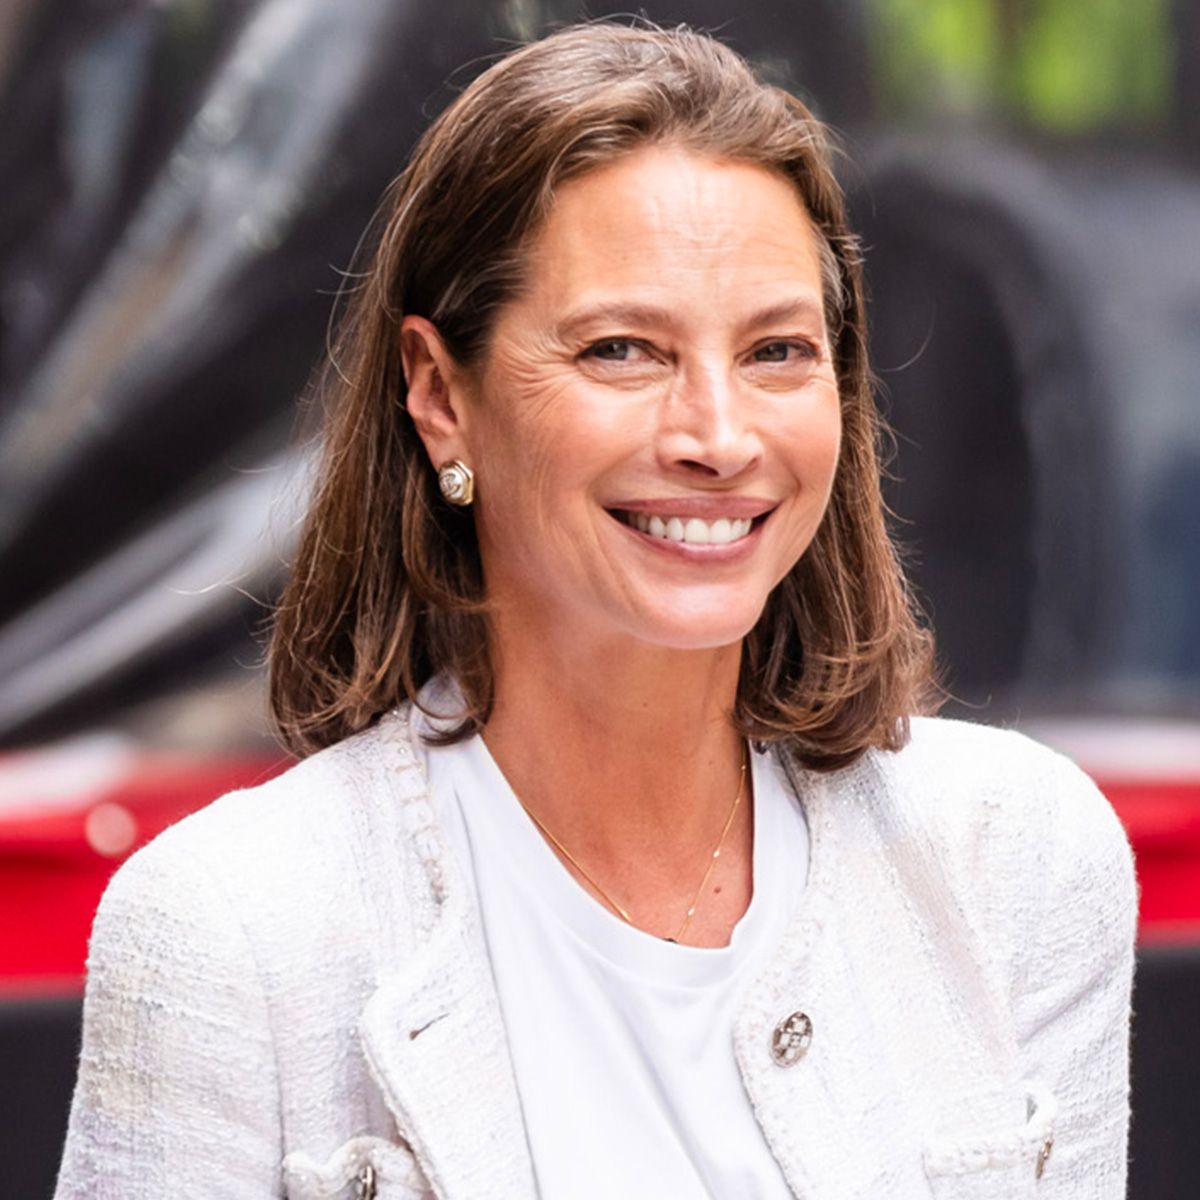 Christy Turlington Wore the Jacket That Makes Jeans Look Elegant